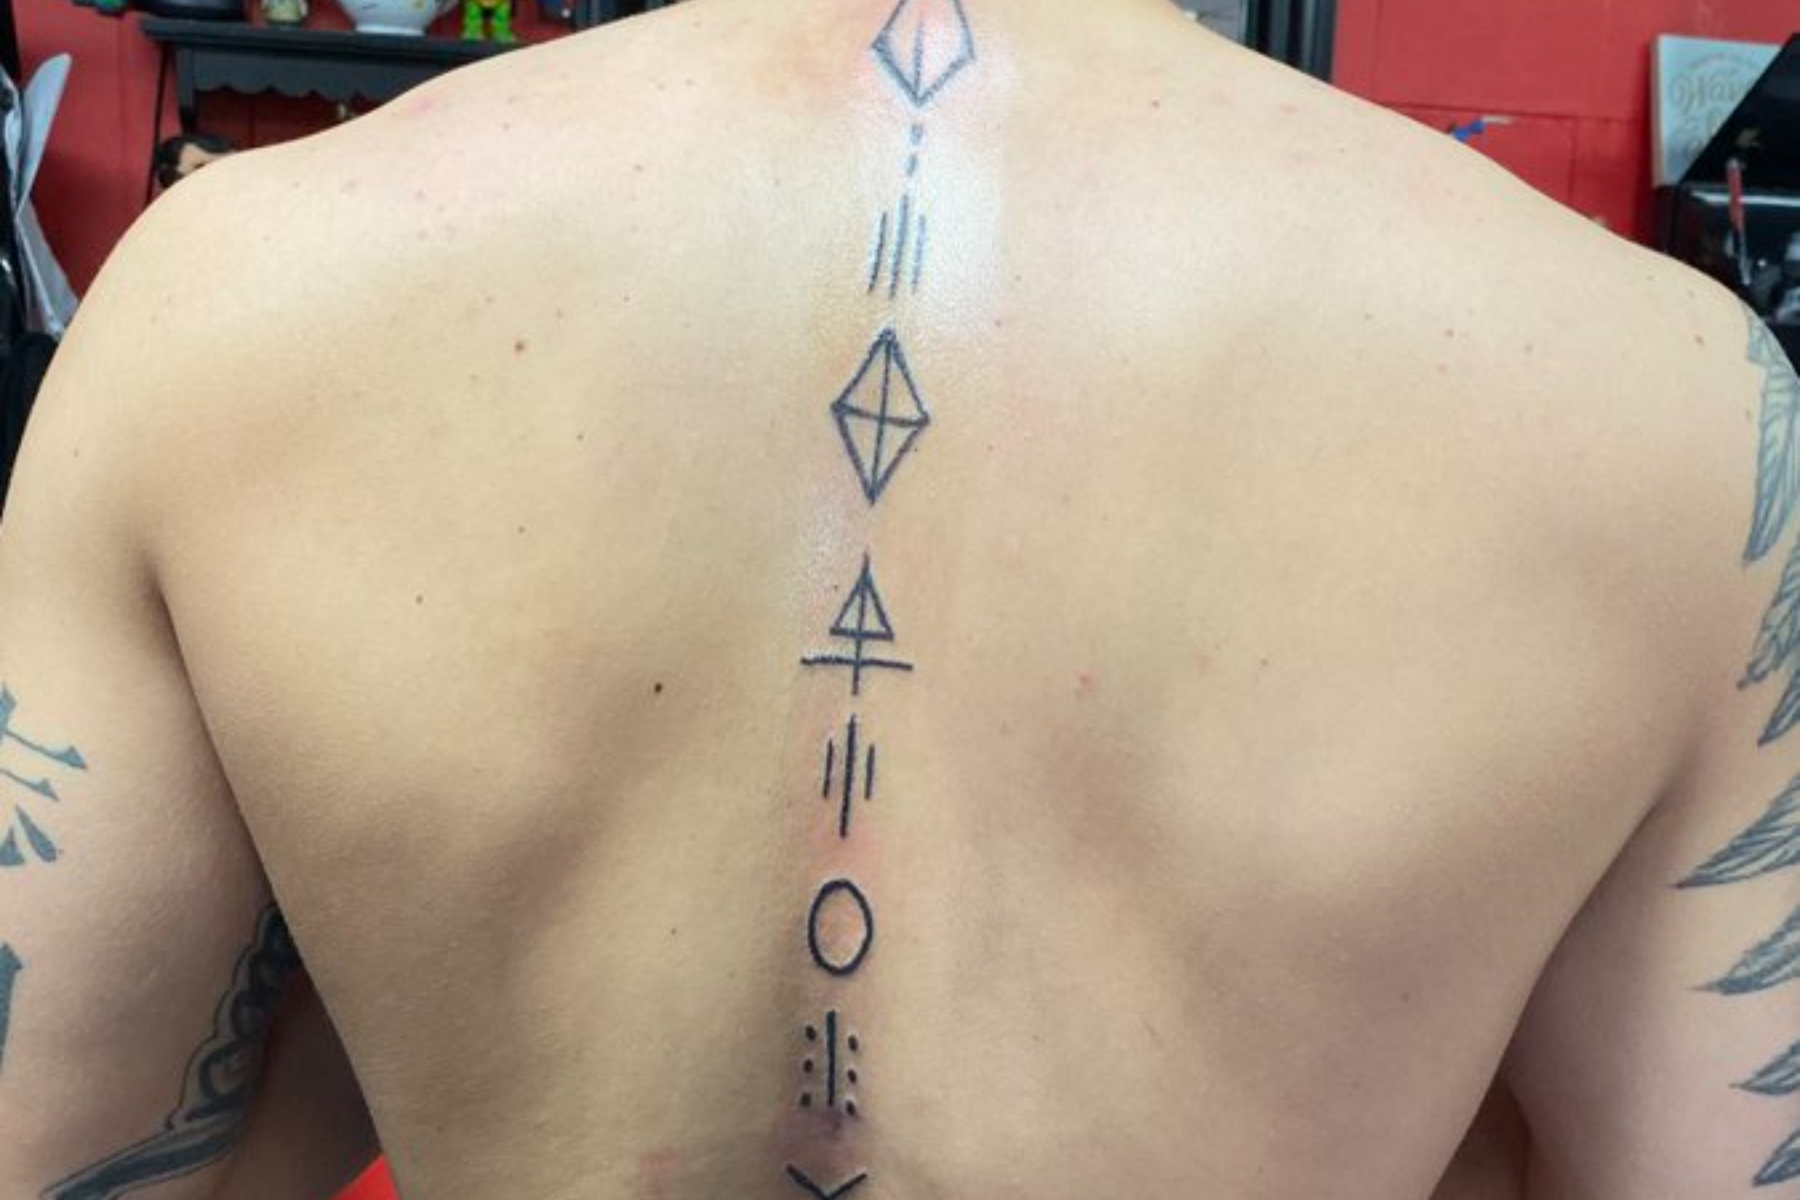 A man has a vertical tattoo along his spine